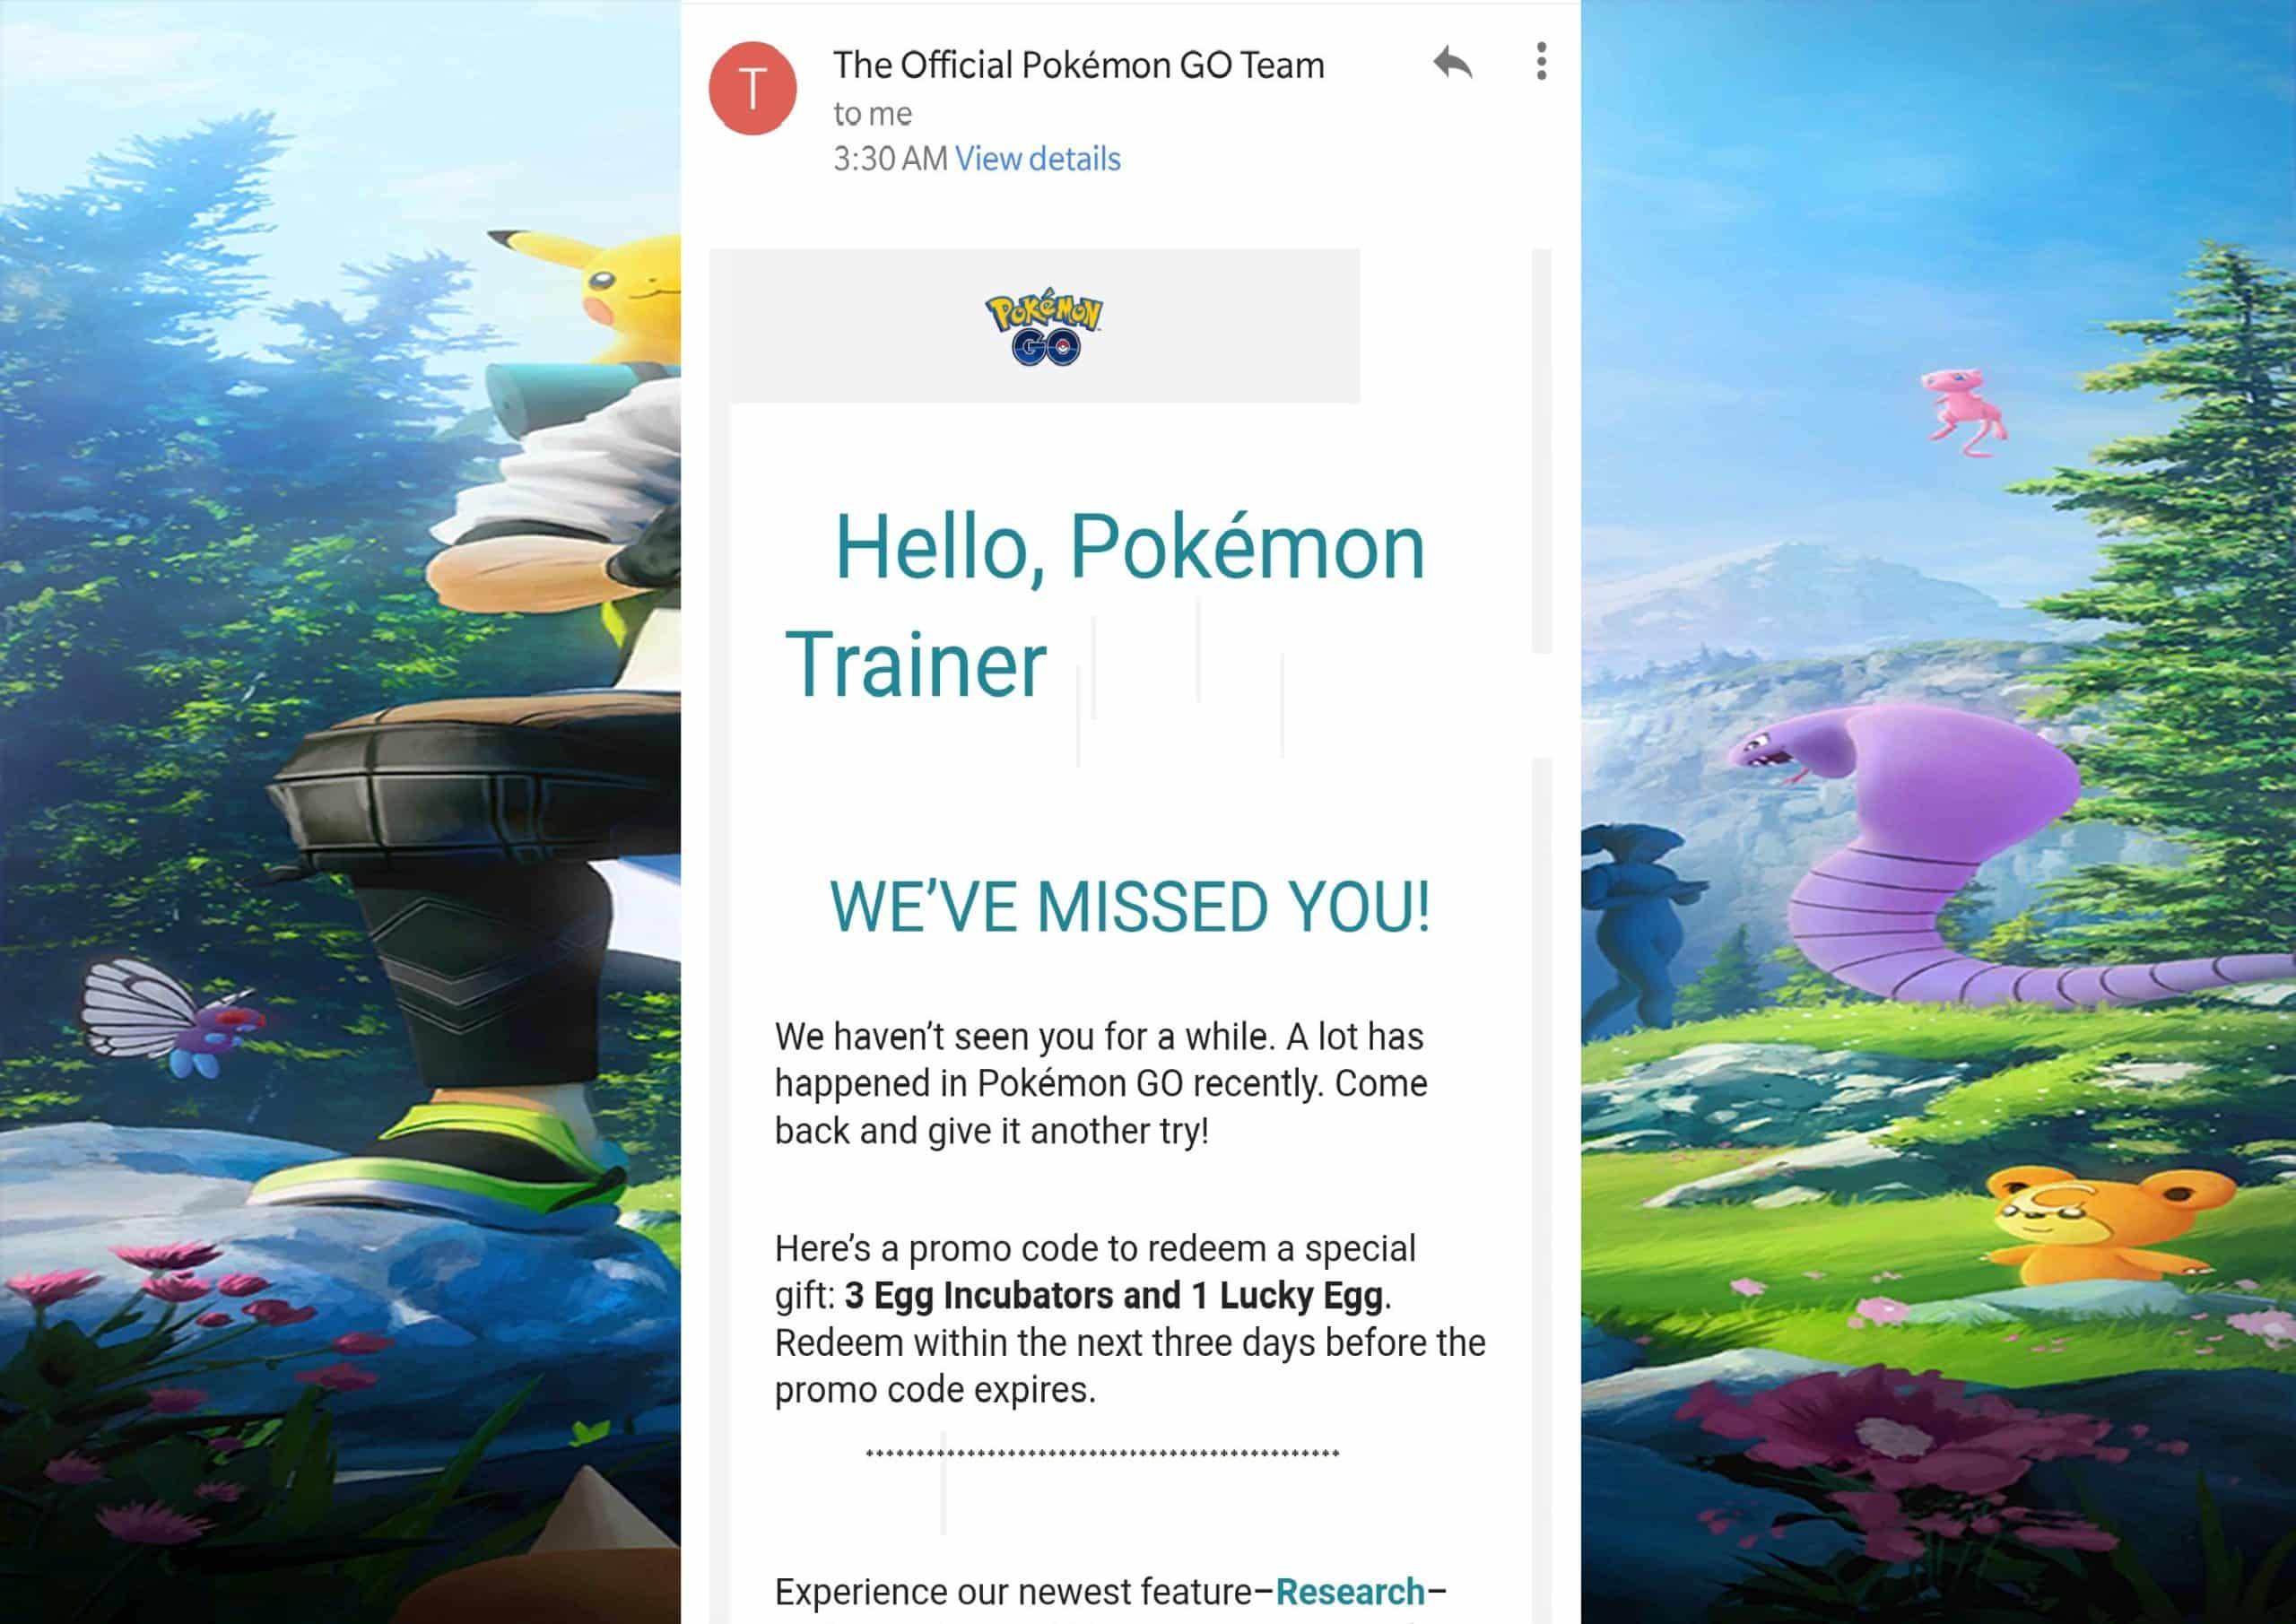 claim-your-promo-code-in-pokemon-go-now-and-get-free-items